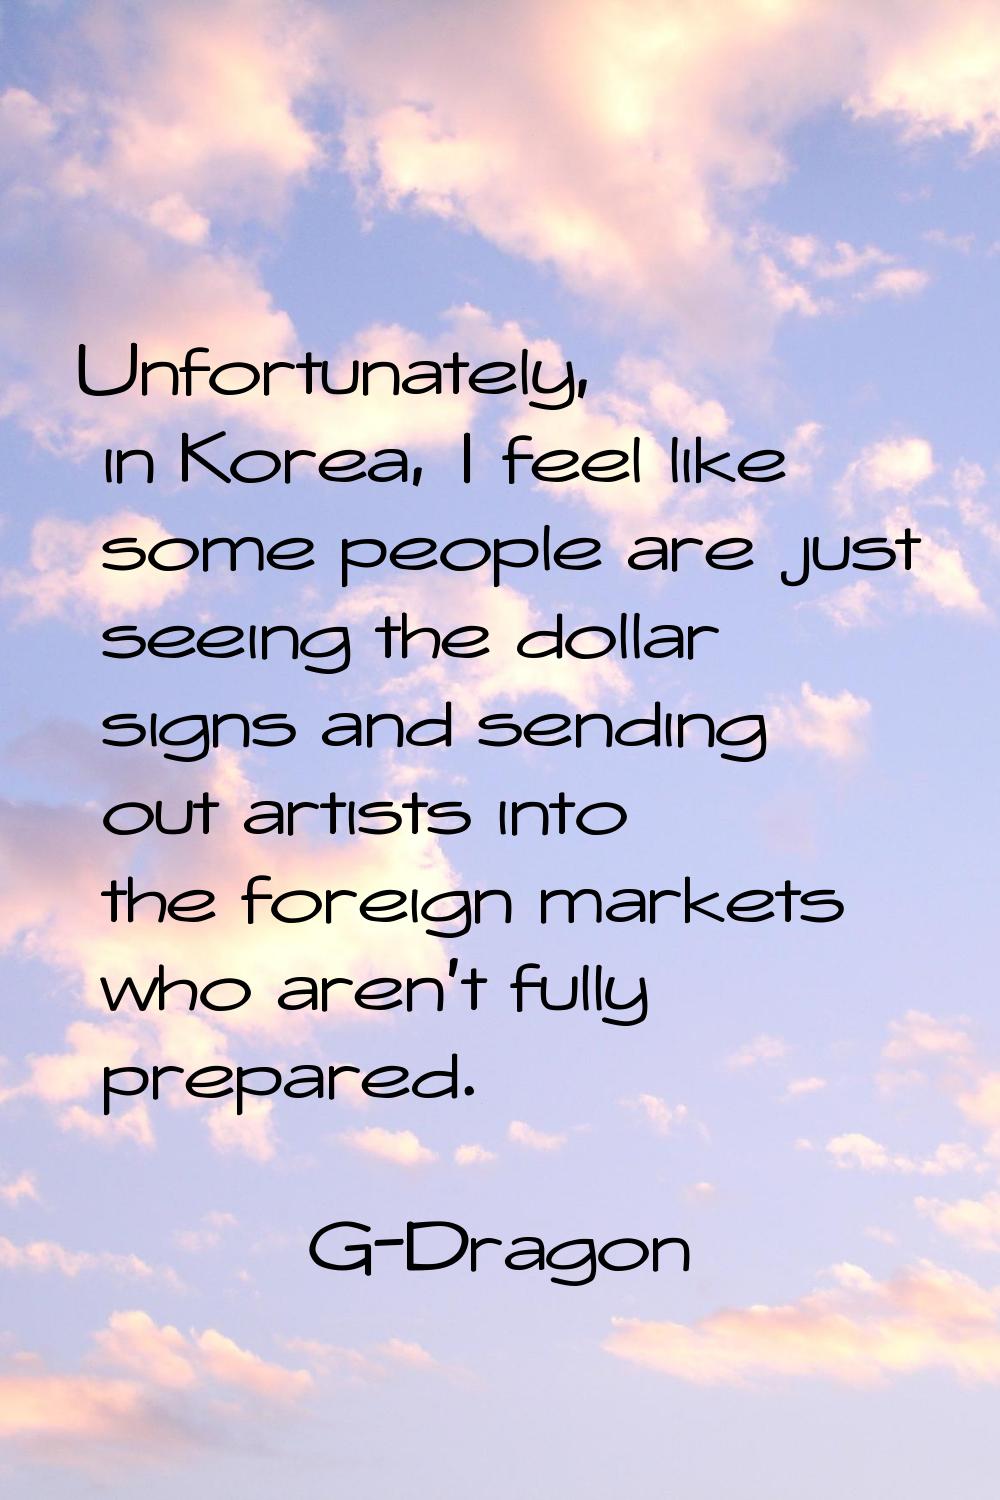 Unfortunately, in Korea, I feel like some people are just seeing the dollar signs and sending out a